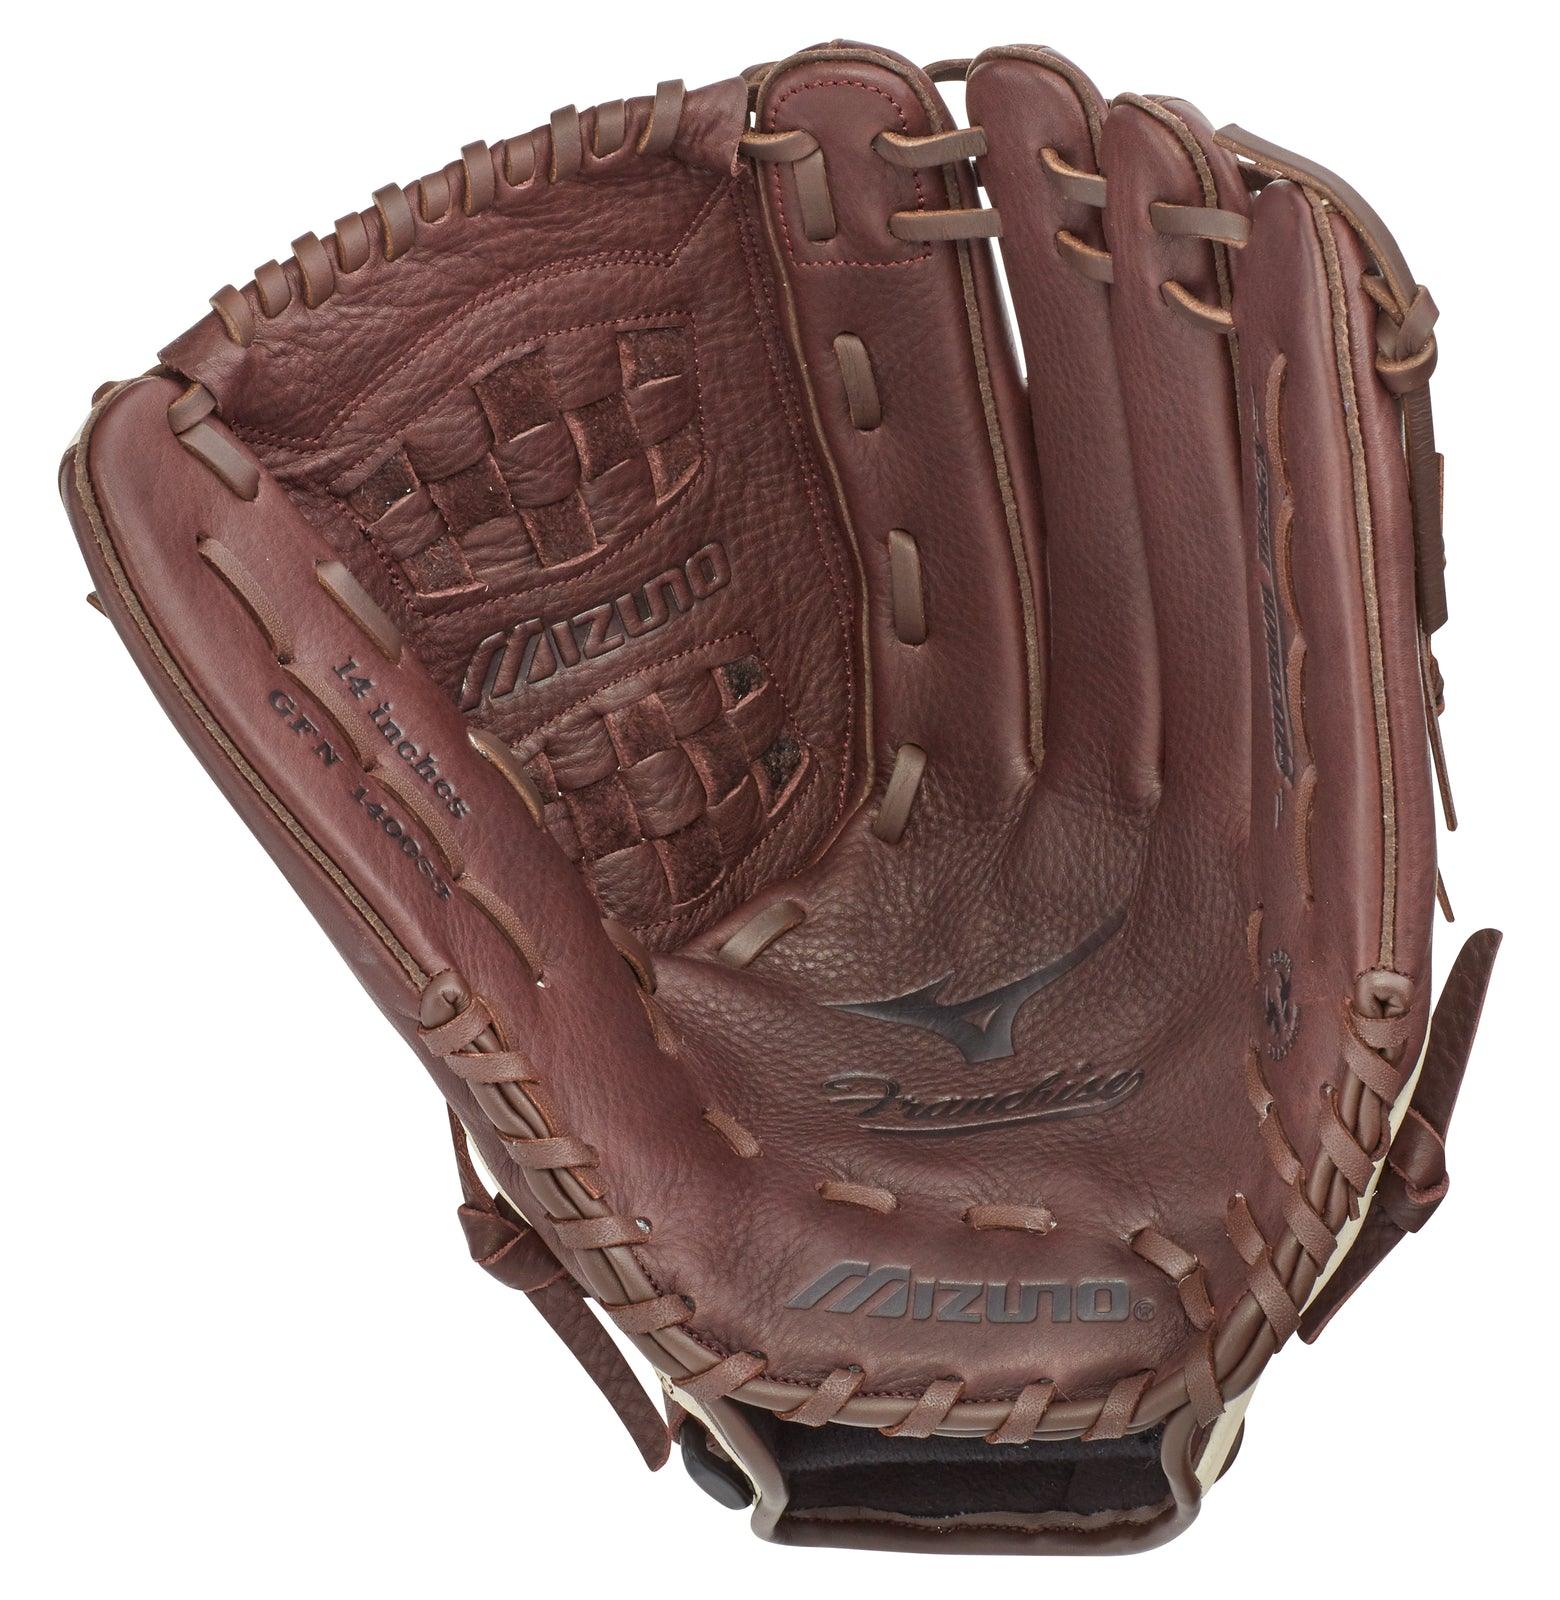 Franchise Series Slowpitch Softball Glove 14" - Sports Excellence